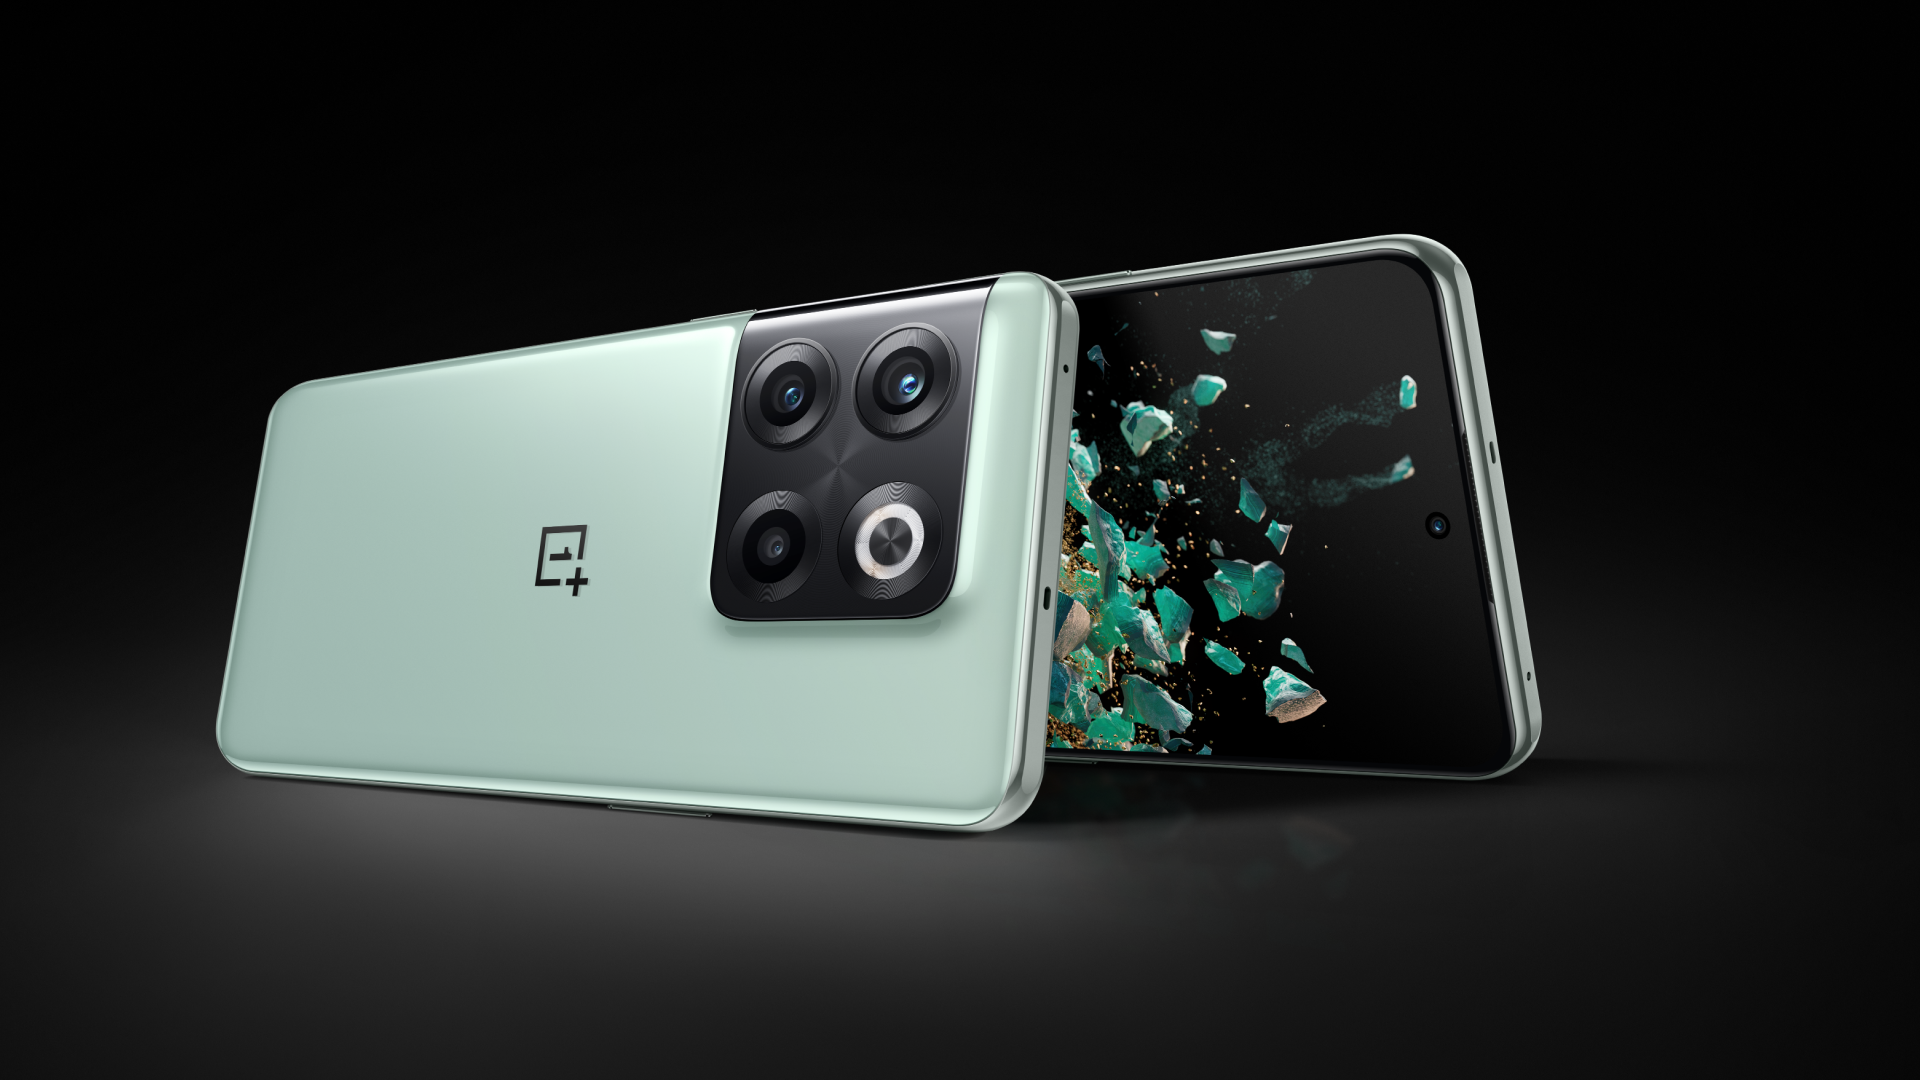 Image of the OnePlus 10T in black and jade green colors